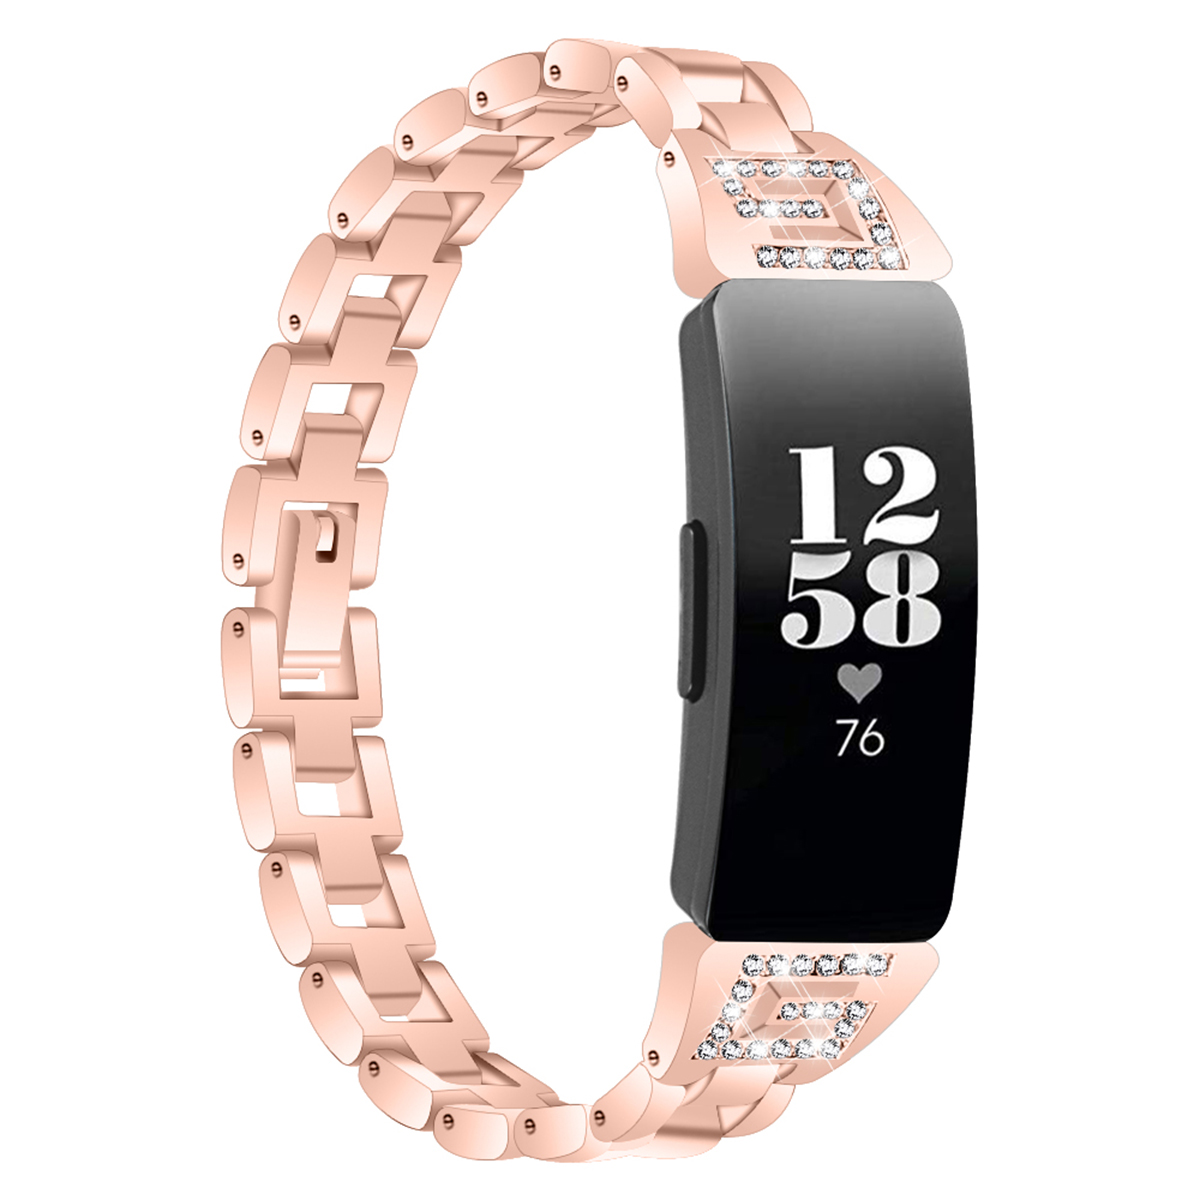 Bakeey-Watch-band-Stainless-Steel-Watch-Strap-For-Fitbit-InspireHR-1607091-5